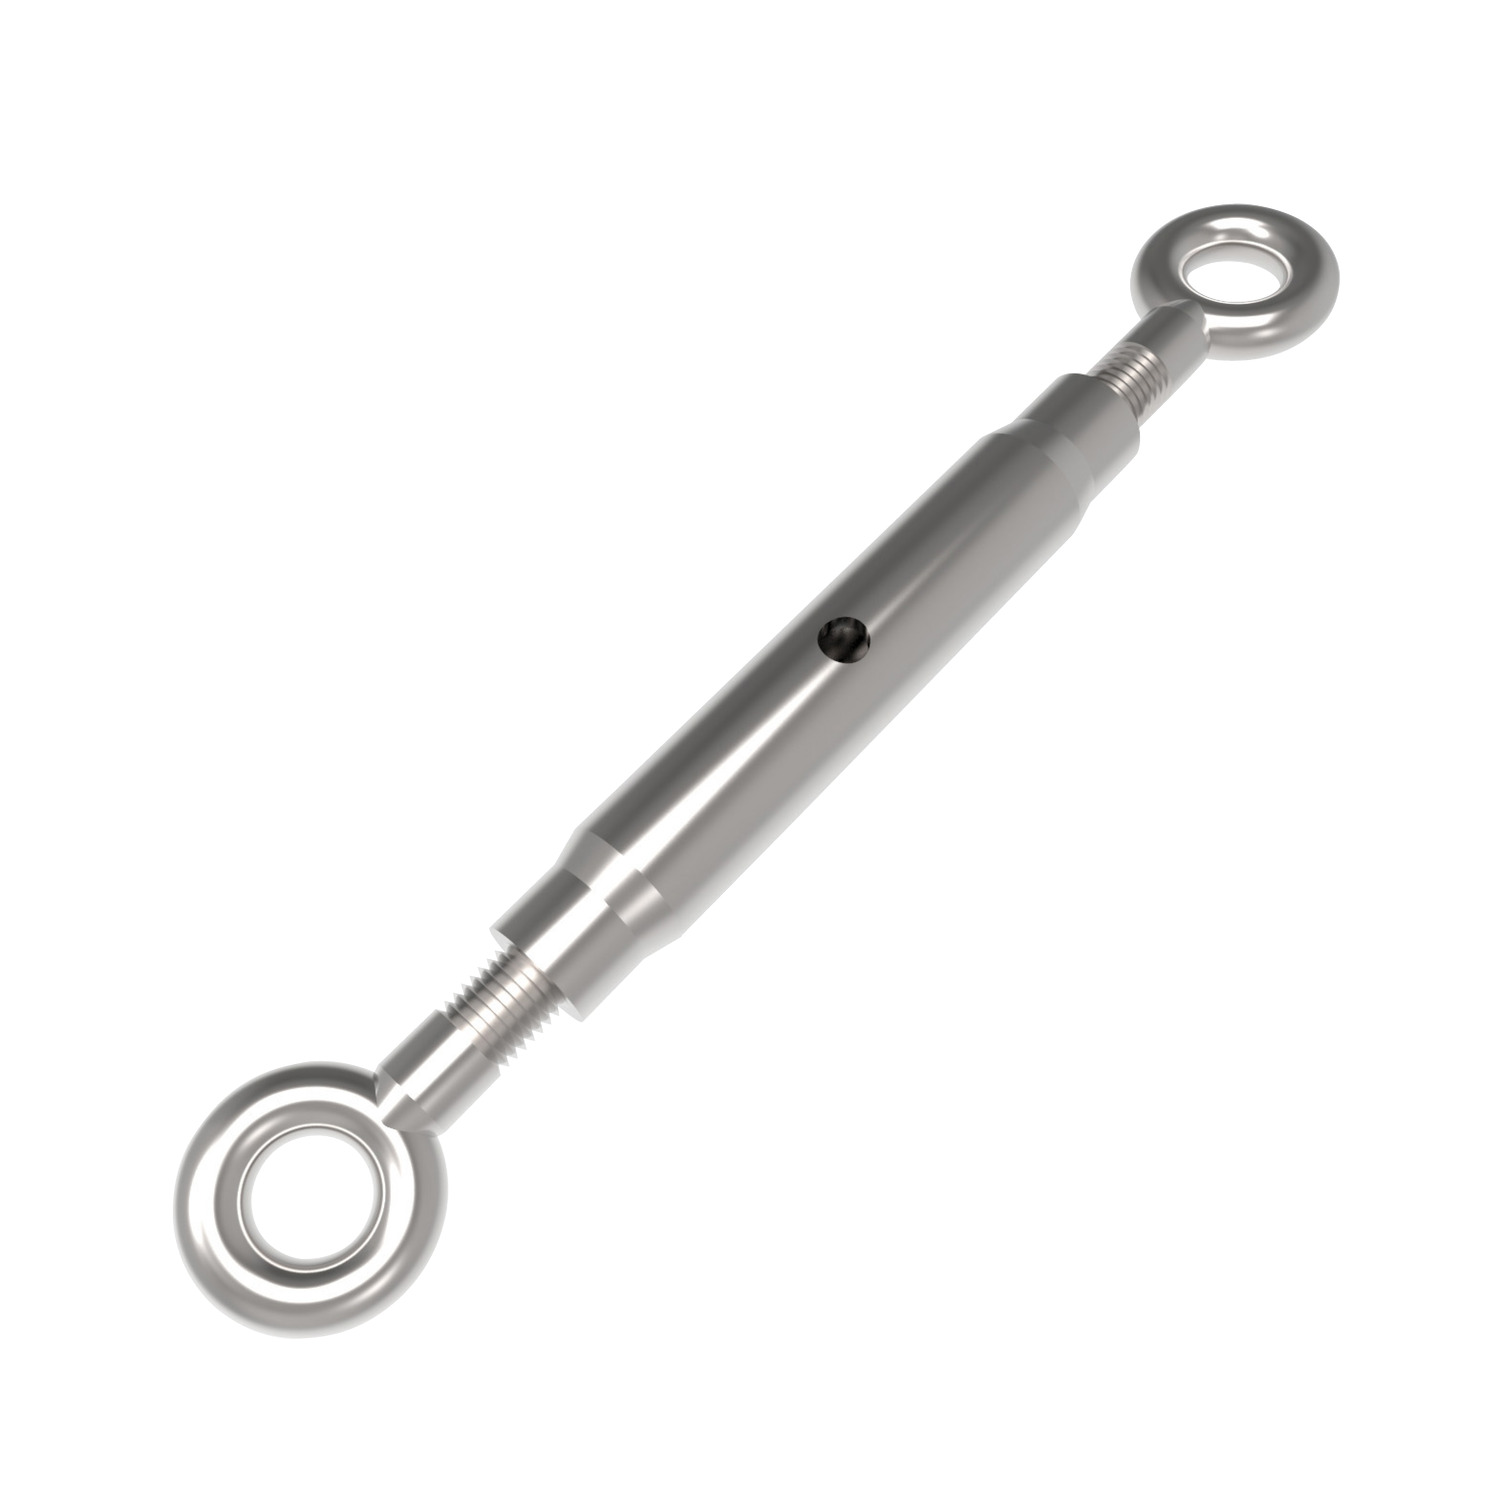 Product R3808, Eye End Pipe Body Turnbuckles steel / 